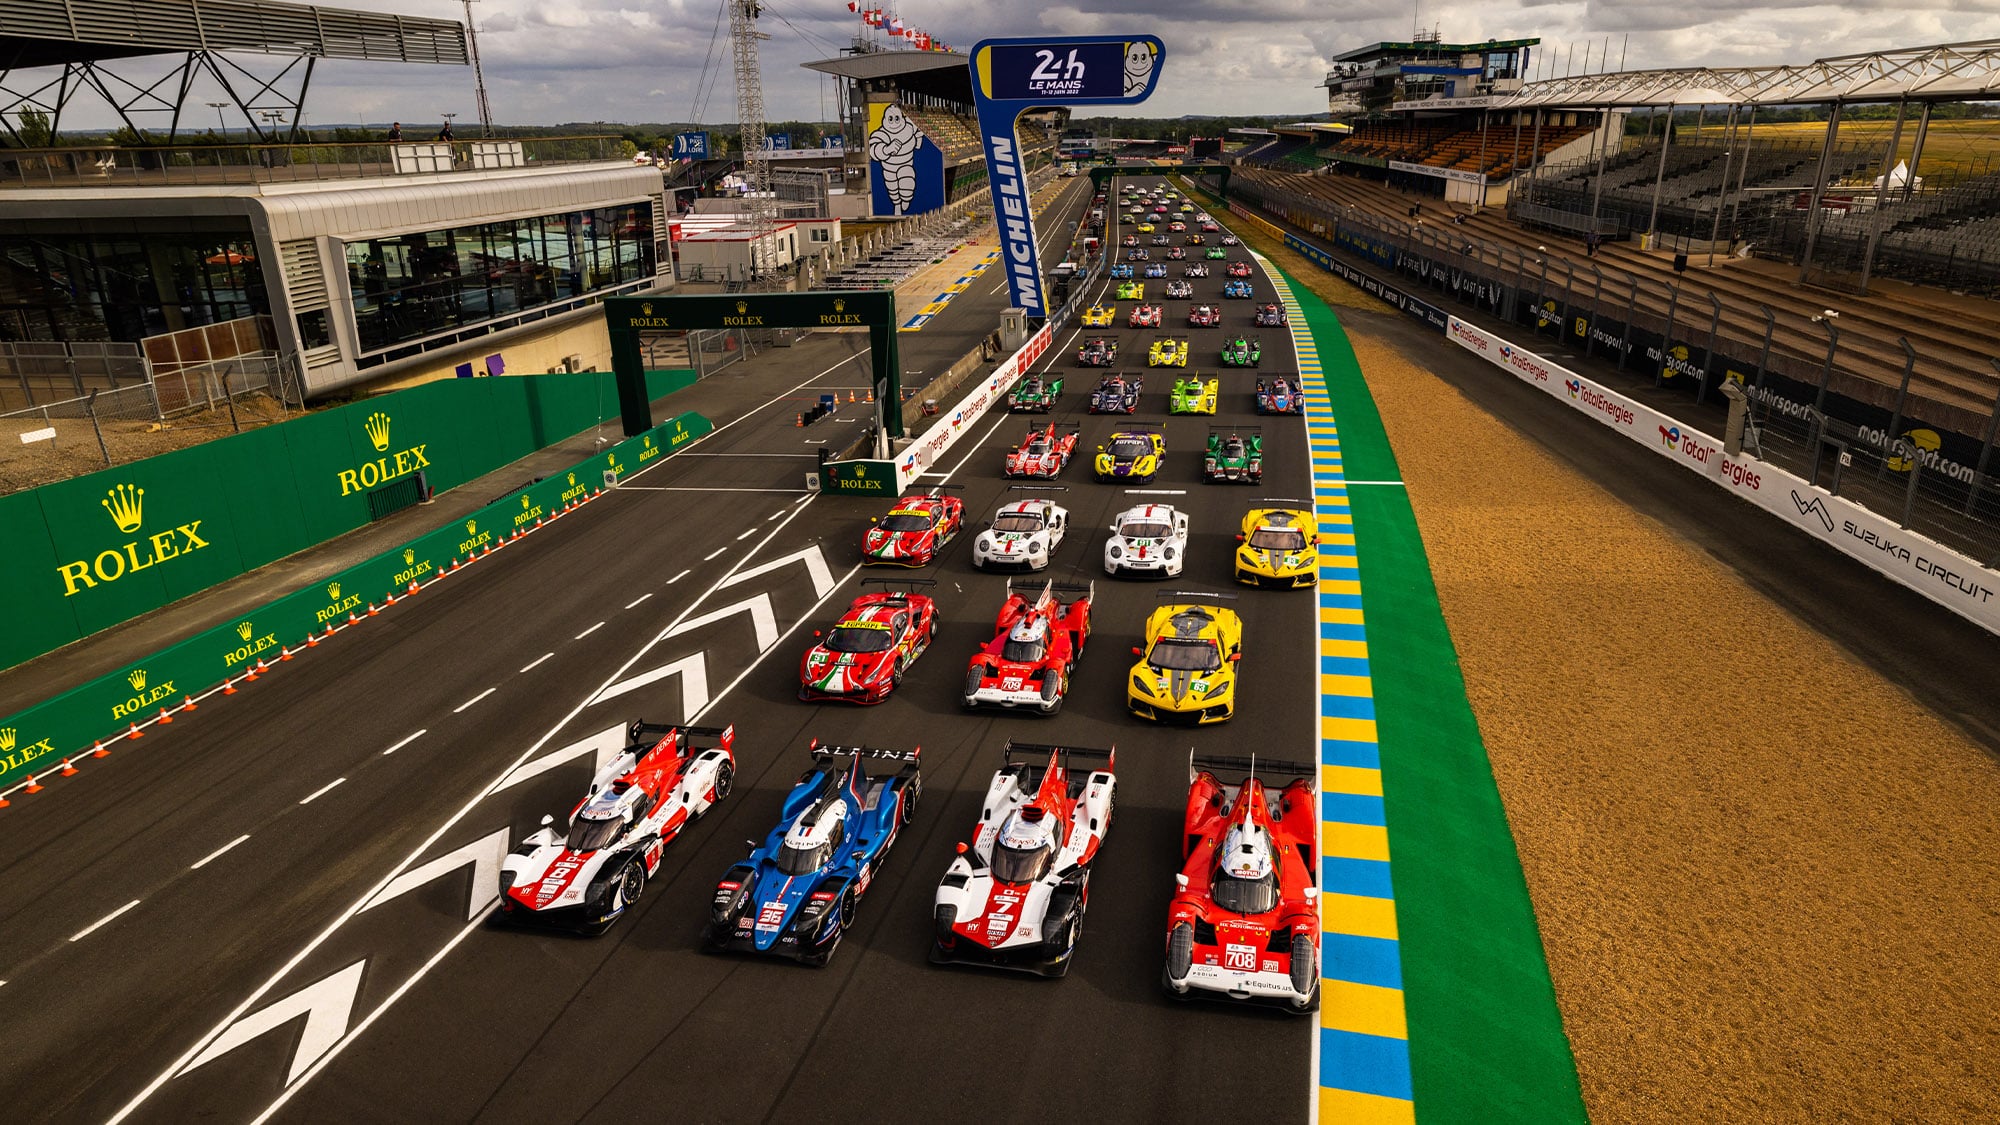 How to watch the 2022 Le Mans 24 Hours race start time, live stream